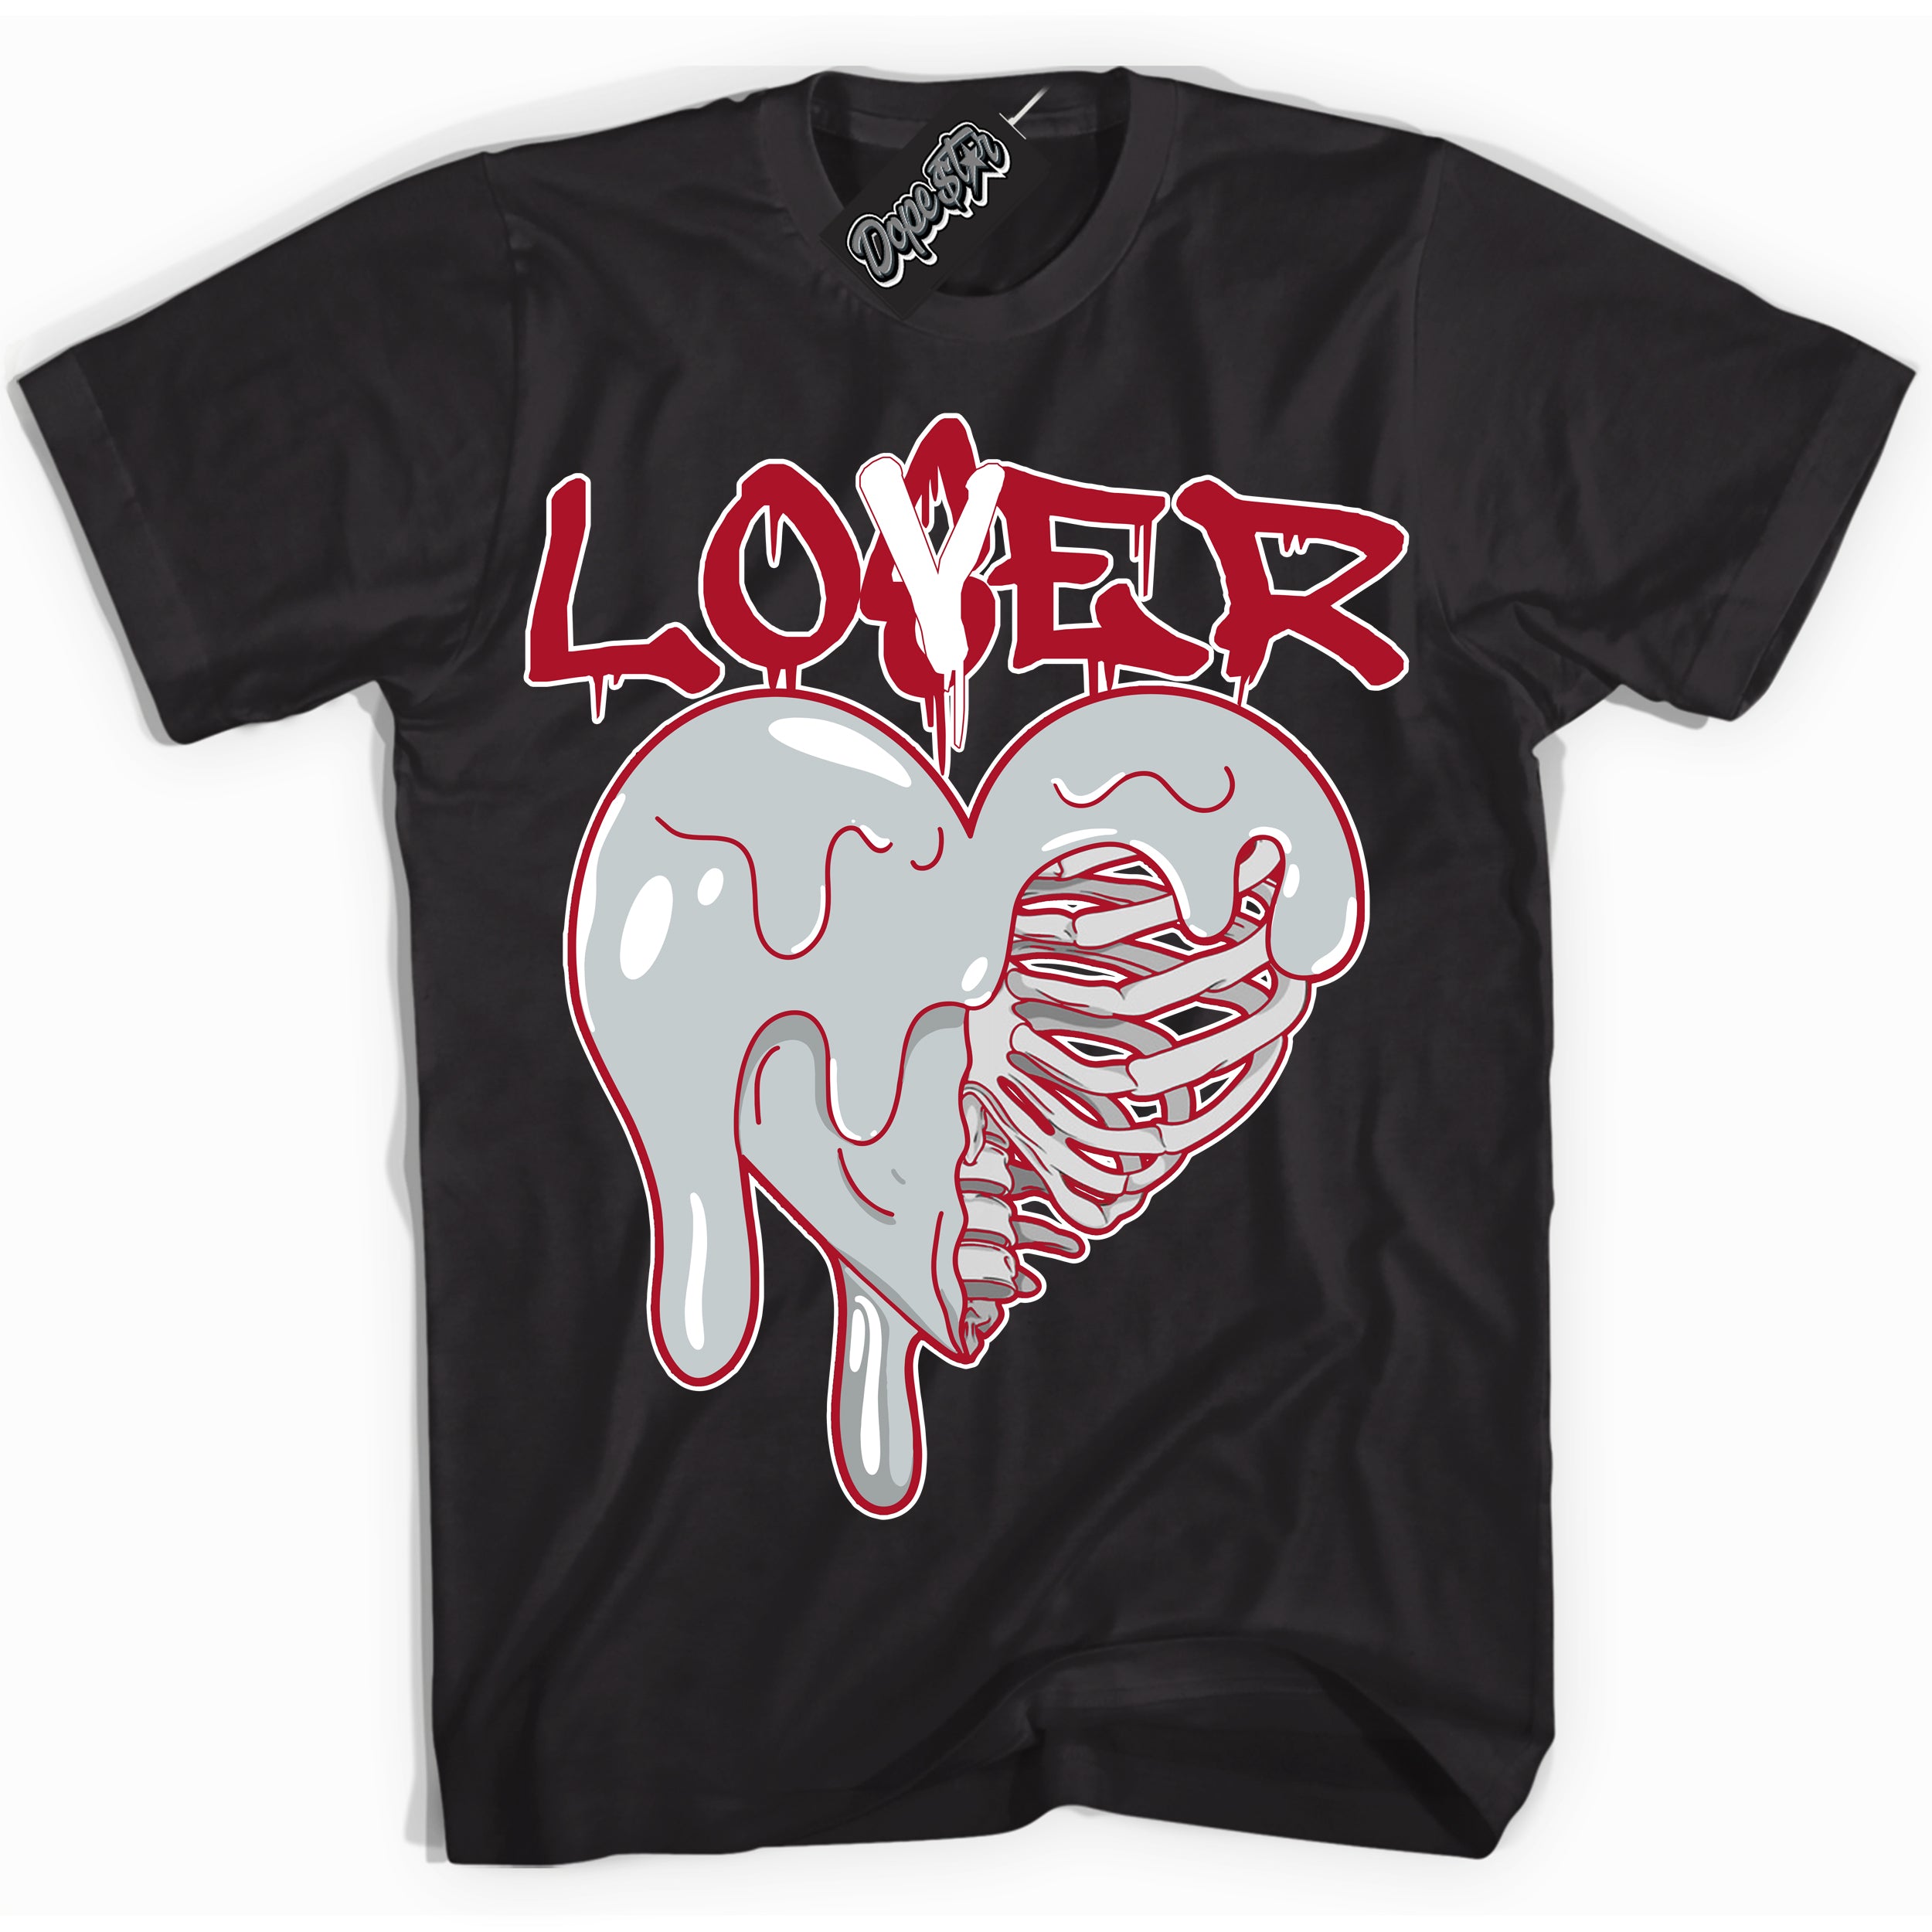 Cool Black Shirt with “ Lover Loser” design that perfectly matches Reverse Ultraman Sneakers.